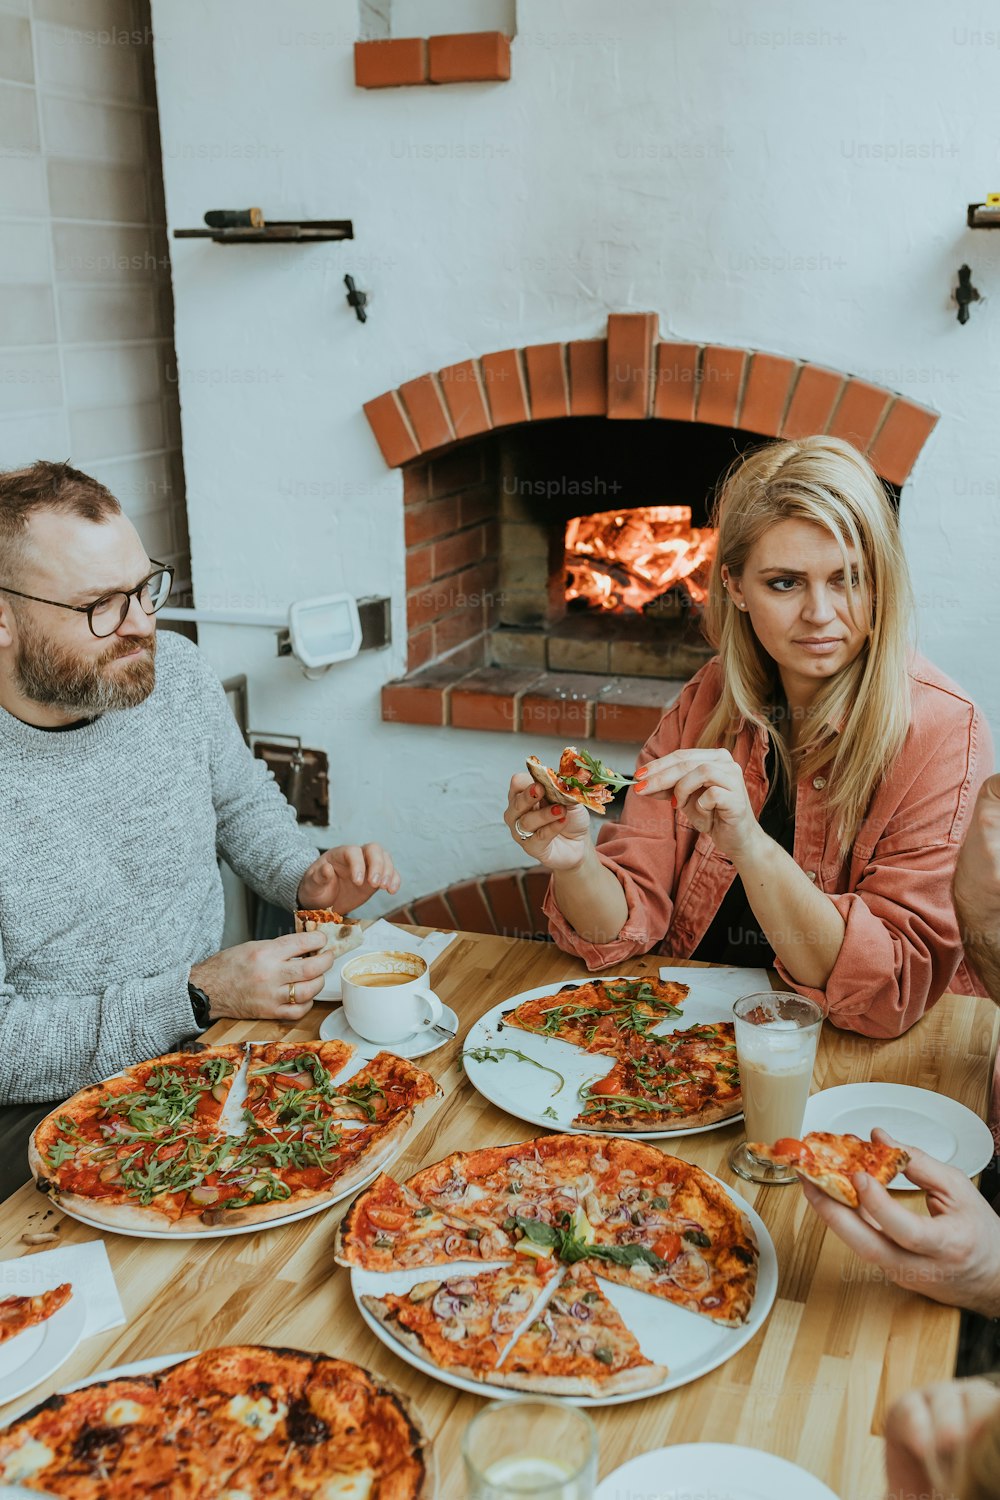 a group of people sitting around a table eating pizza